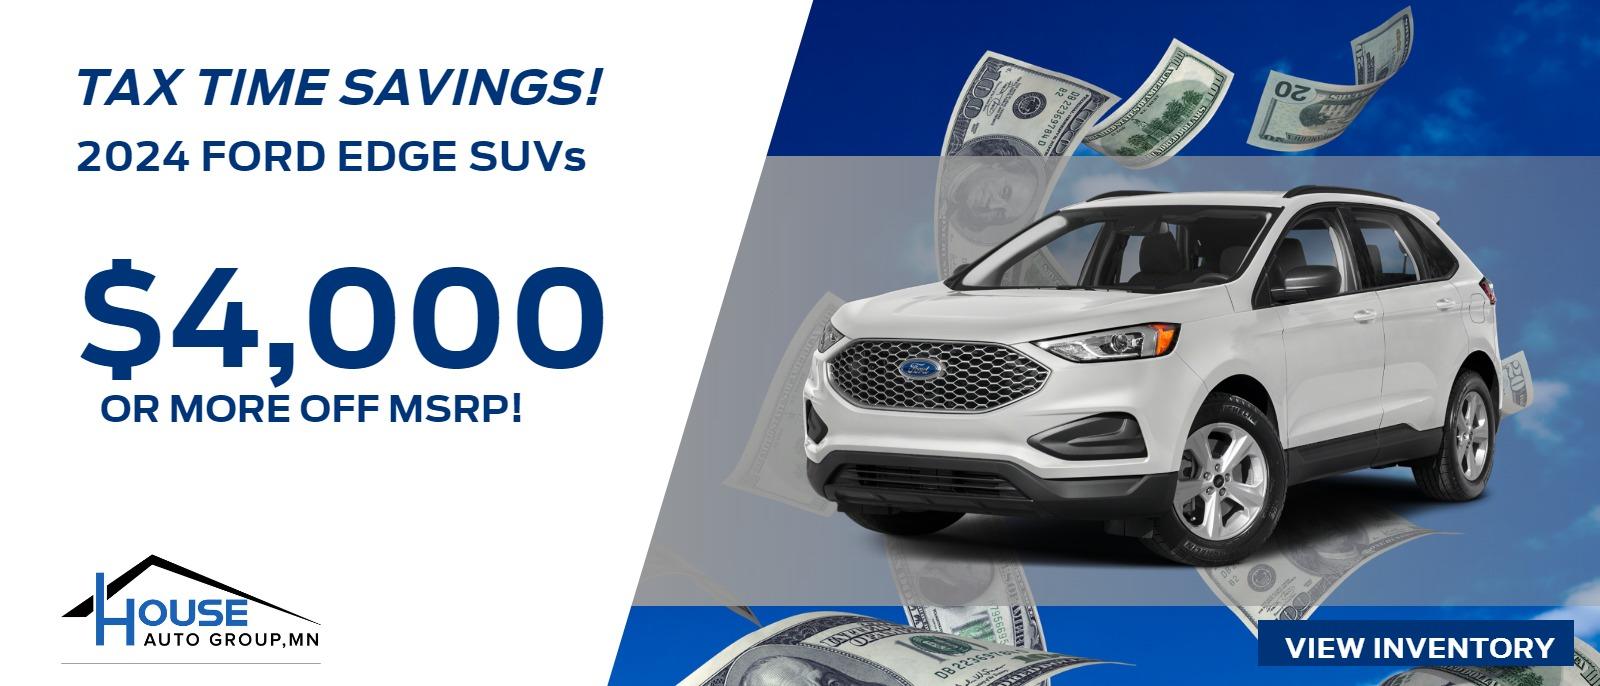 2024 Ford Edge SUVs -- $4,000 Or More Off MSRP!